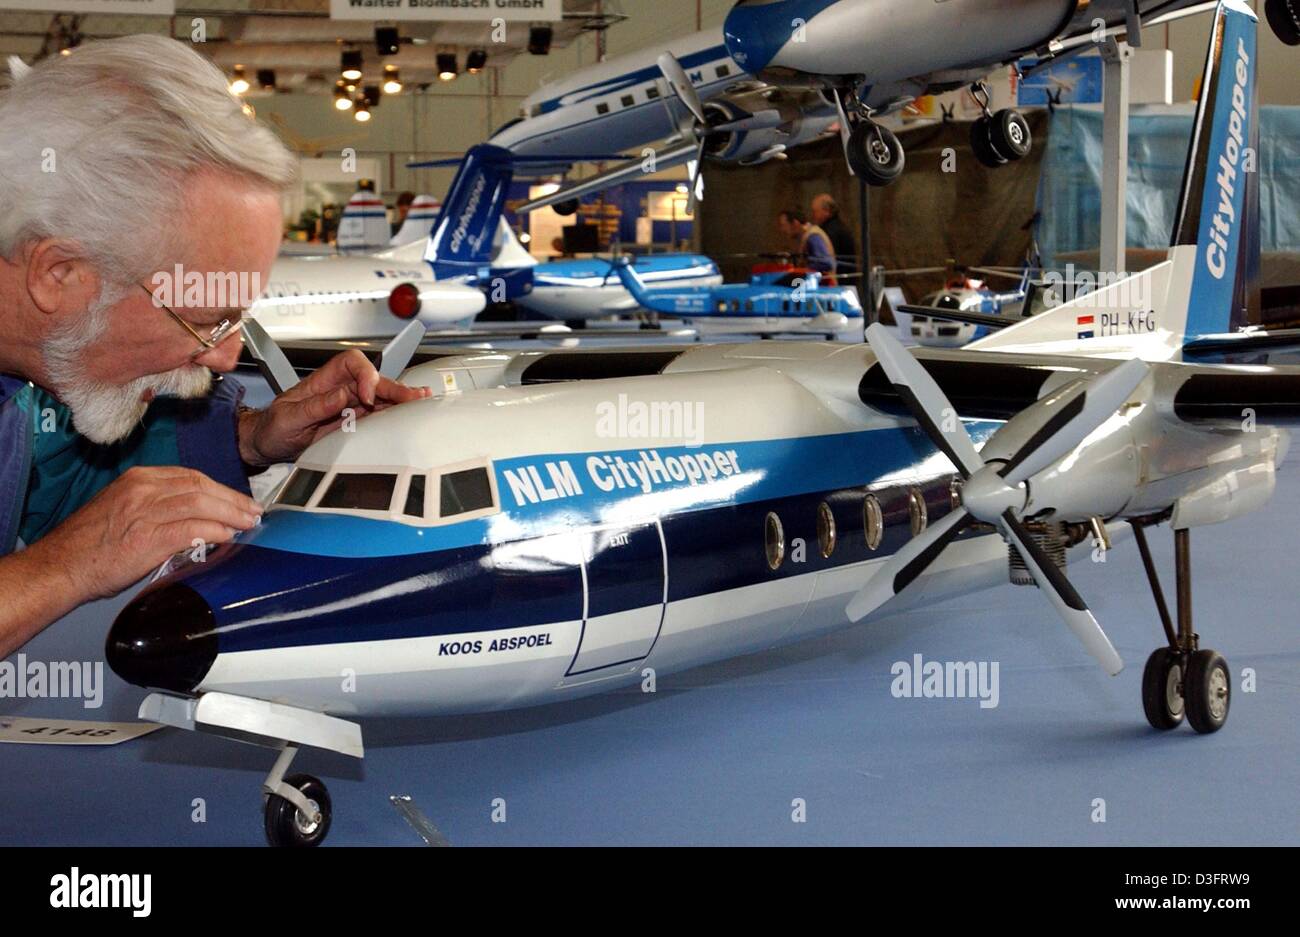 (dpa) - Rom Bakker puts the finishing touches on his volant airplane model of a Fokker F 27 on display at the trade fair for model making in Dortmund, Germany, 8 April 2003. Stock Photo